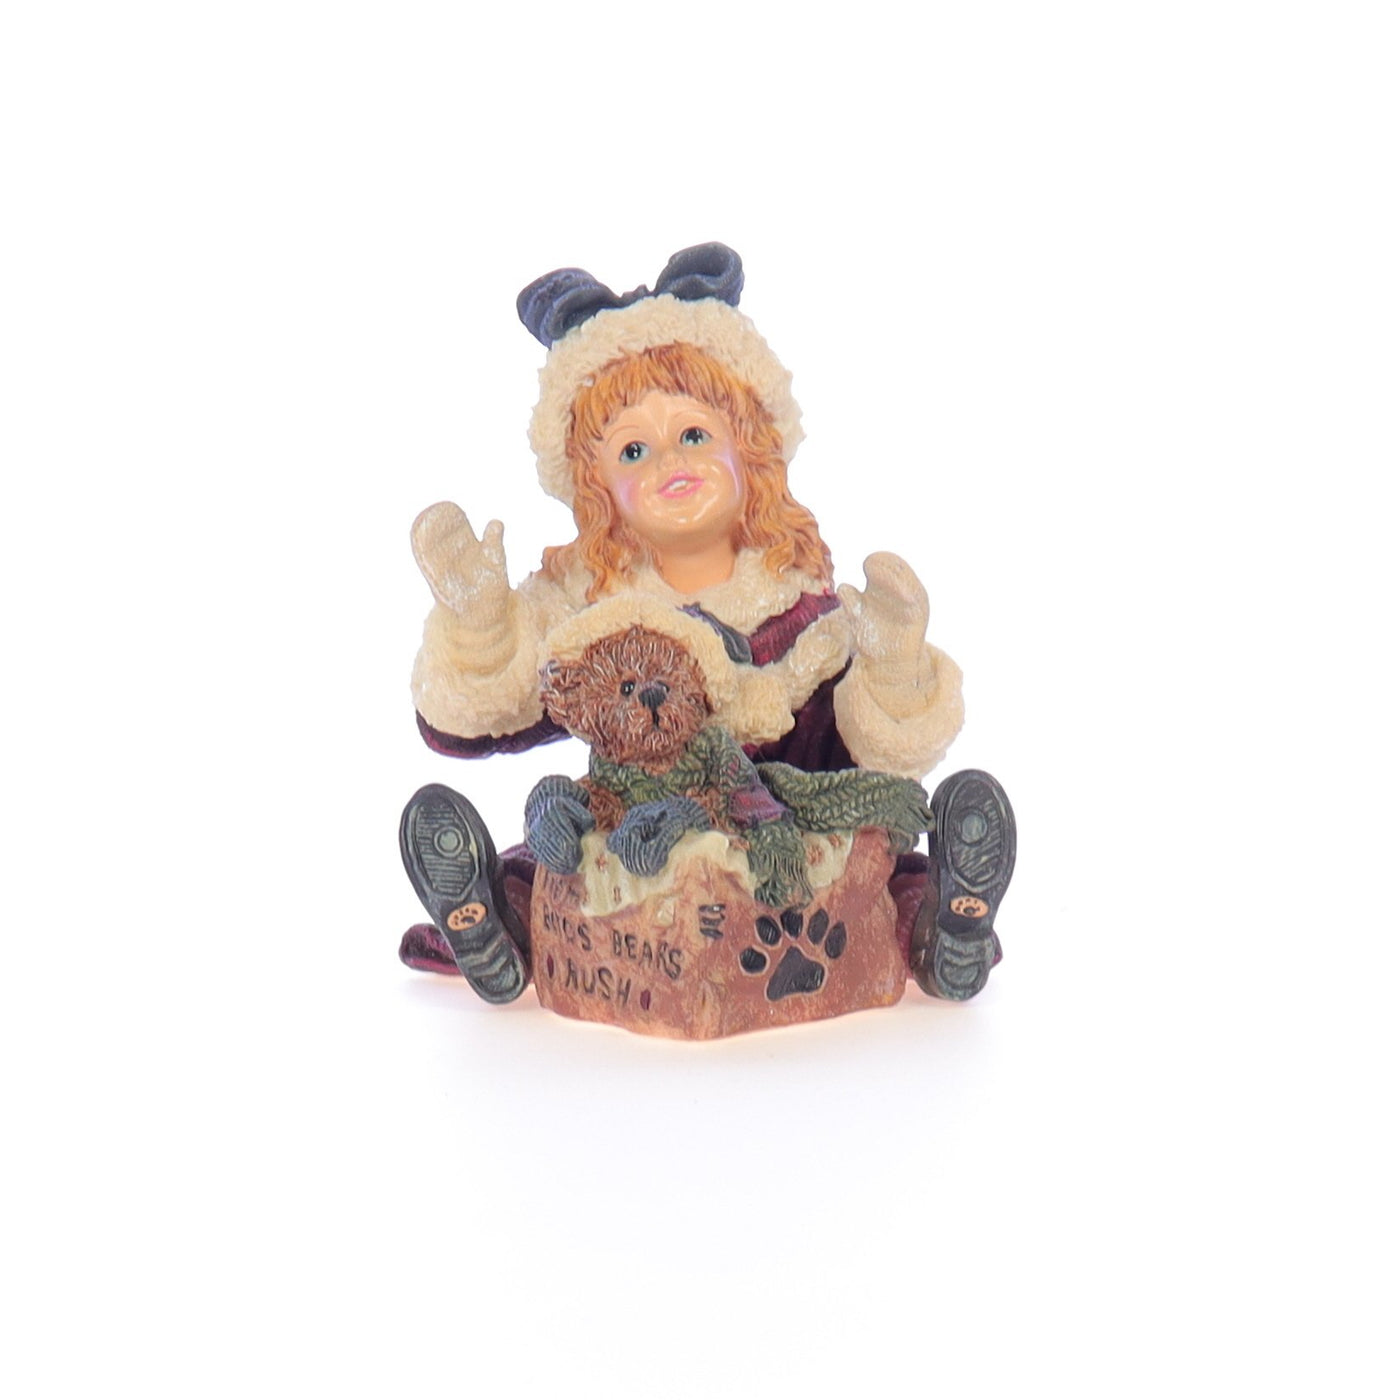 Boyds_Bears_Dollstone_Resin_Figurine_Kimberly_with_Klaus_Special_Delivery_3547_01